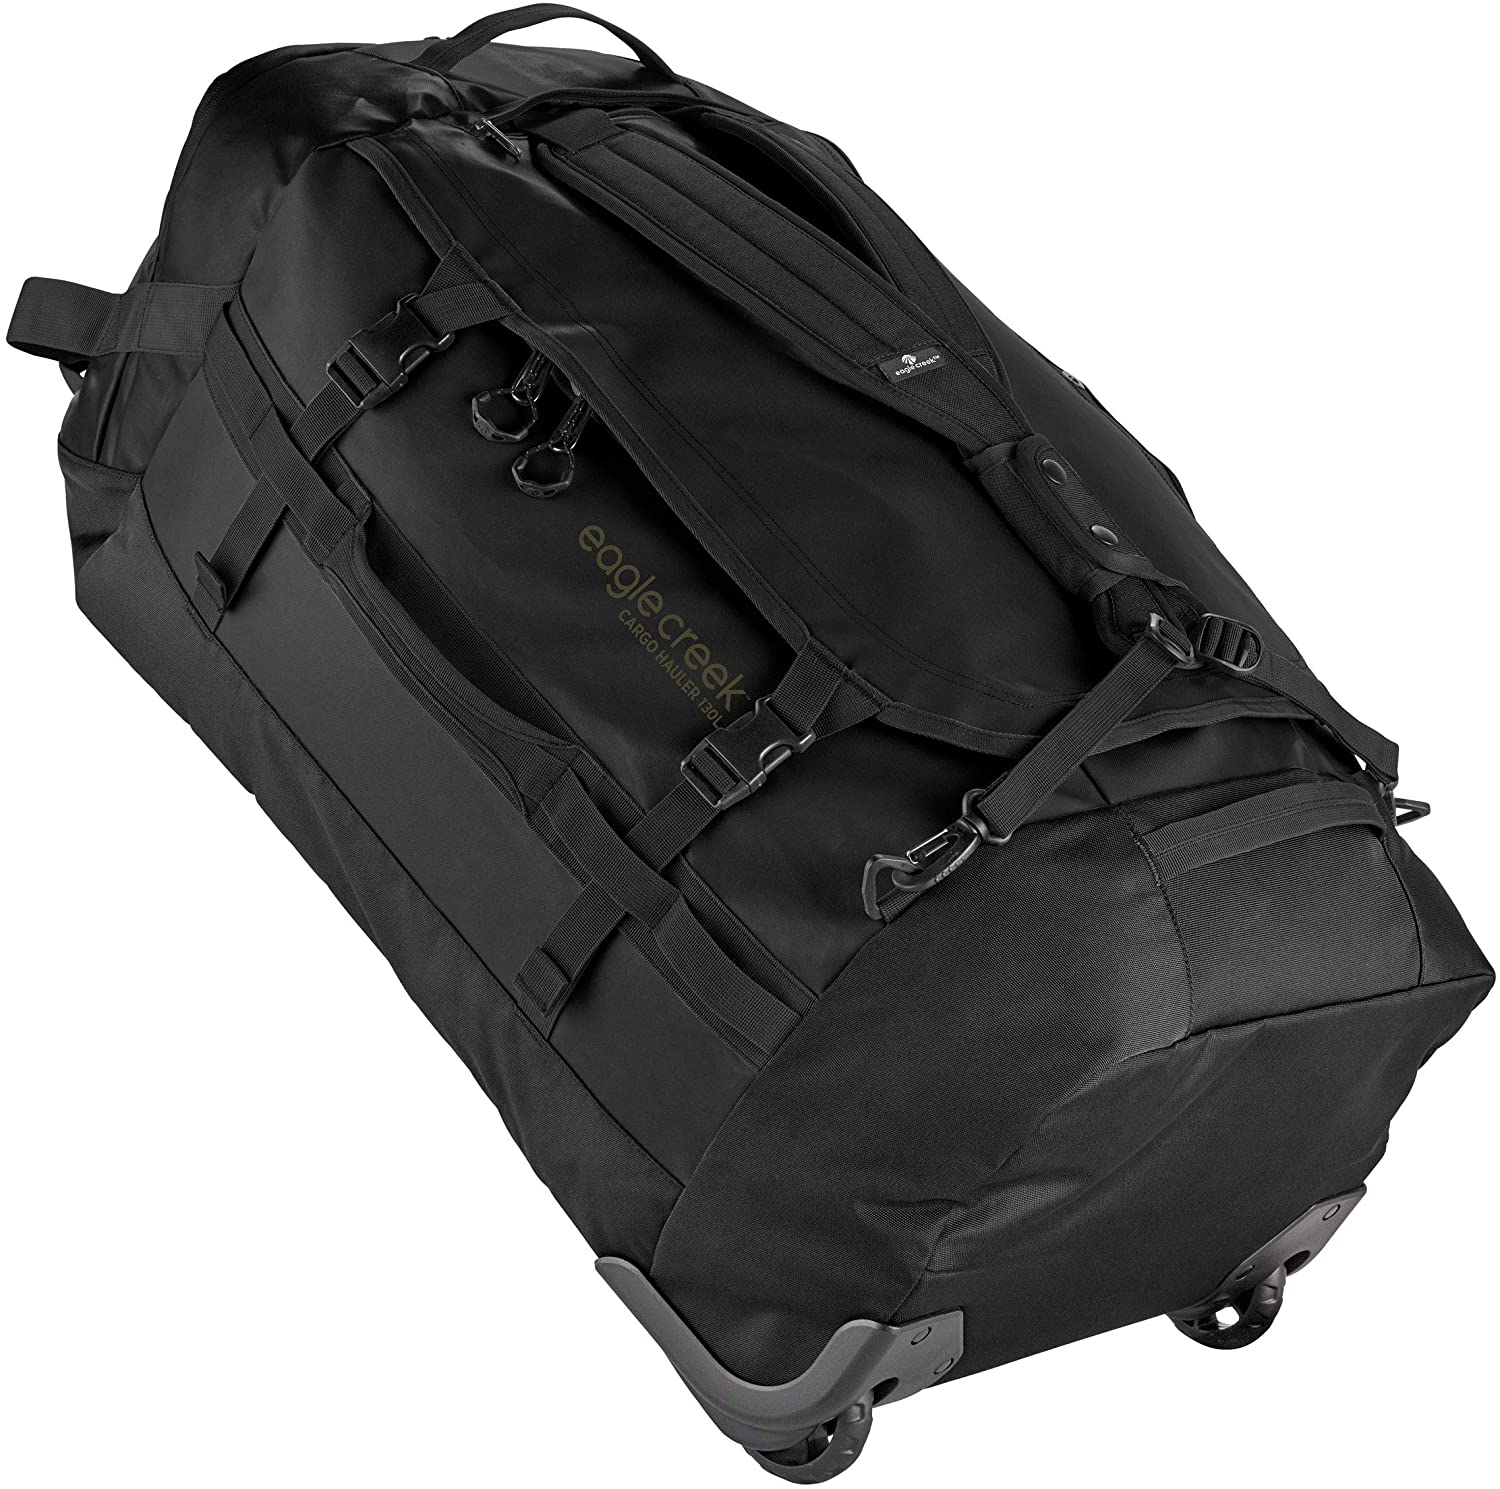 Eagle Creek Cargo Hauler Wheeled Duffel 130L in Jet Black color from the front